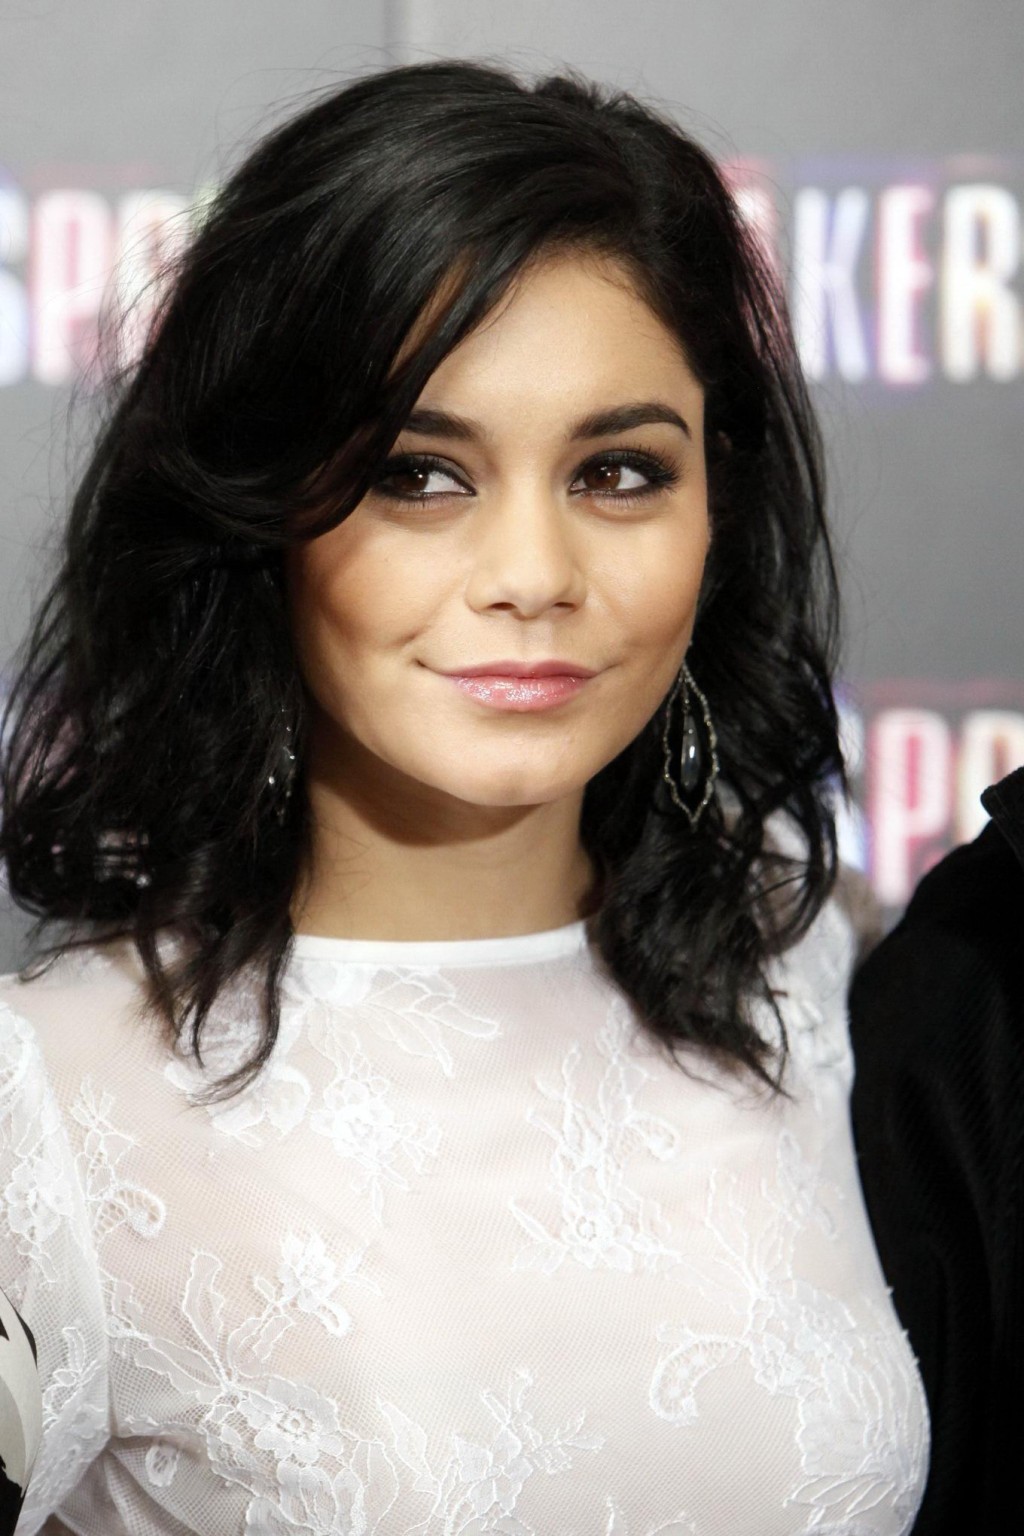 Vanessa Hudgens Looks Very Hot Wearing A White Skirt  Belly Top At The 'Spring B